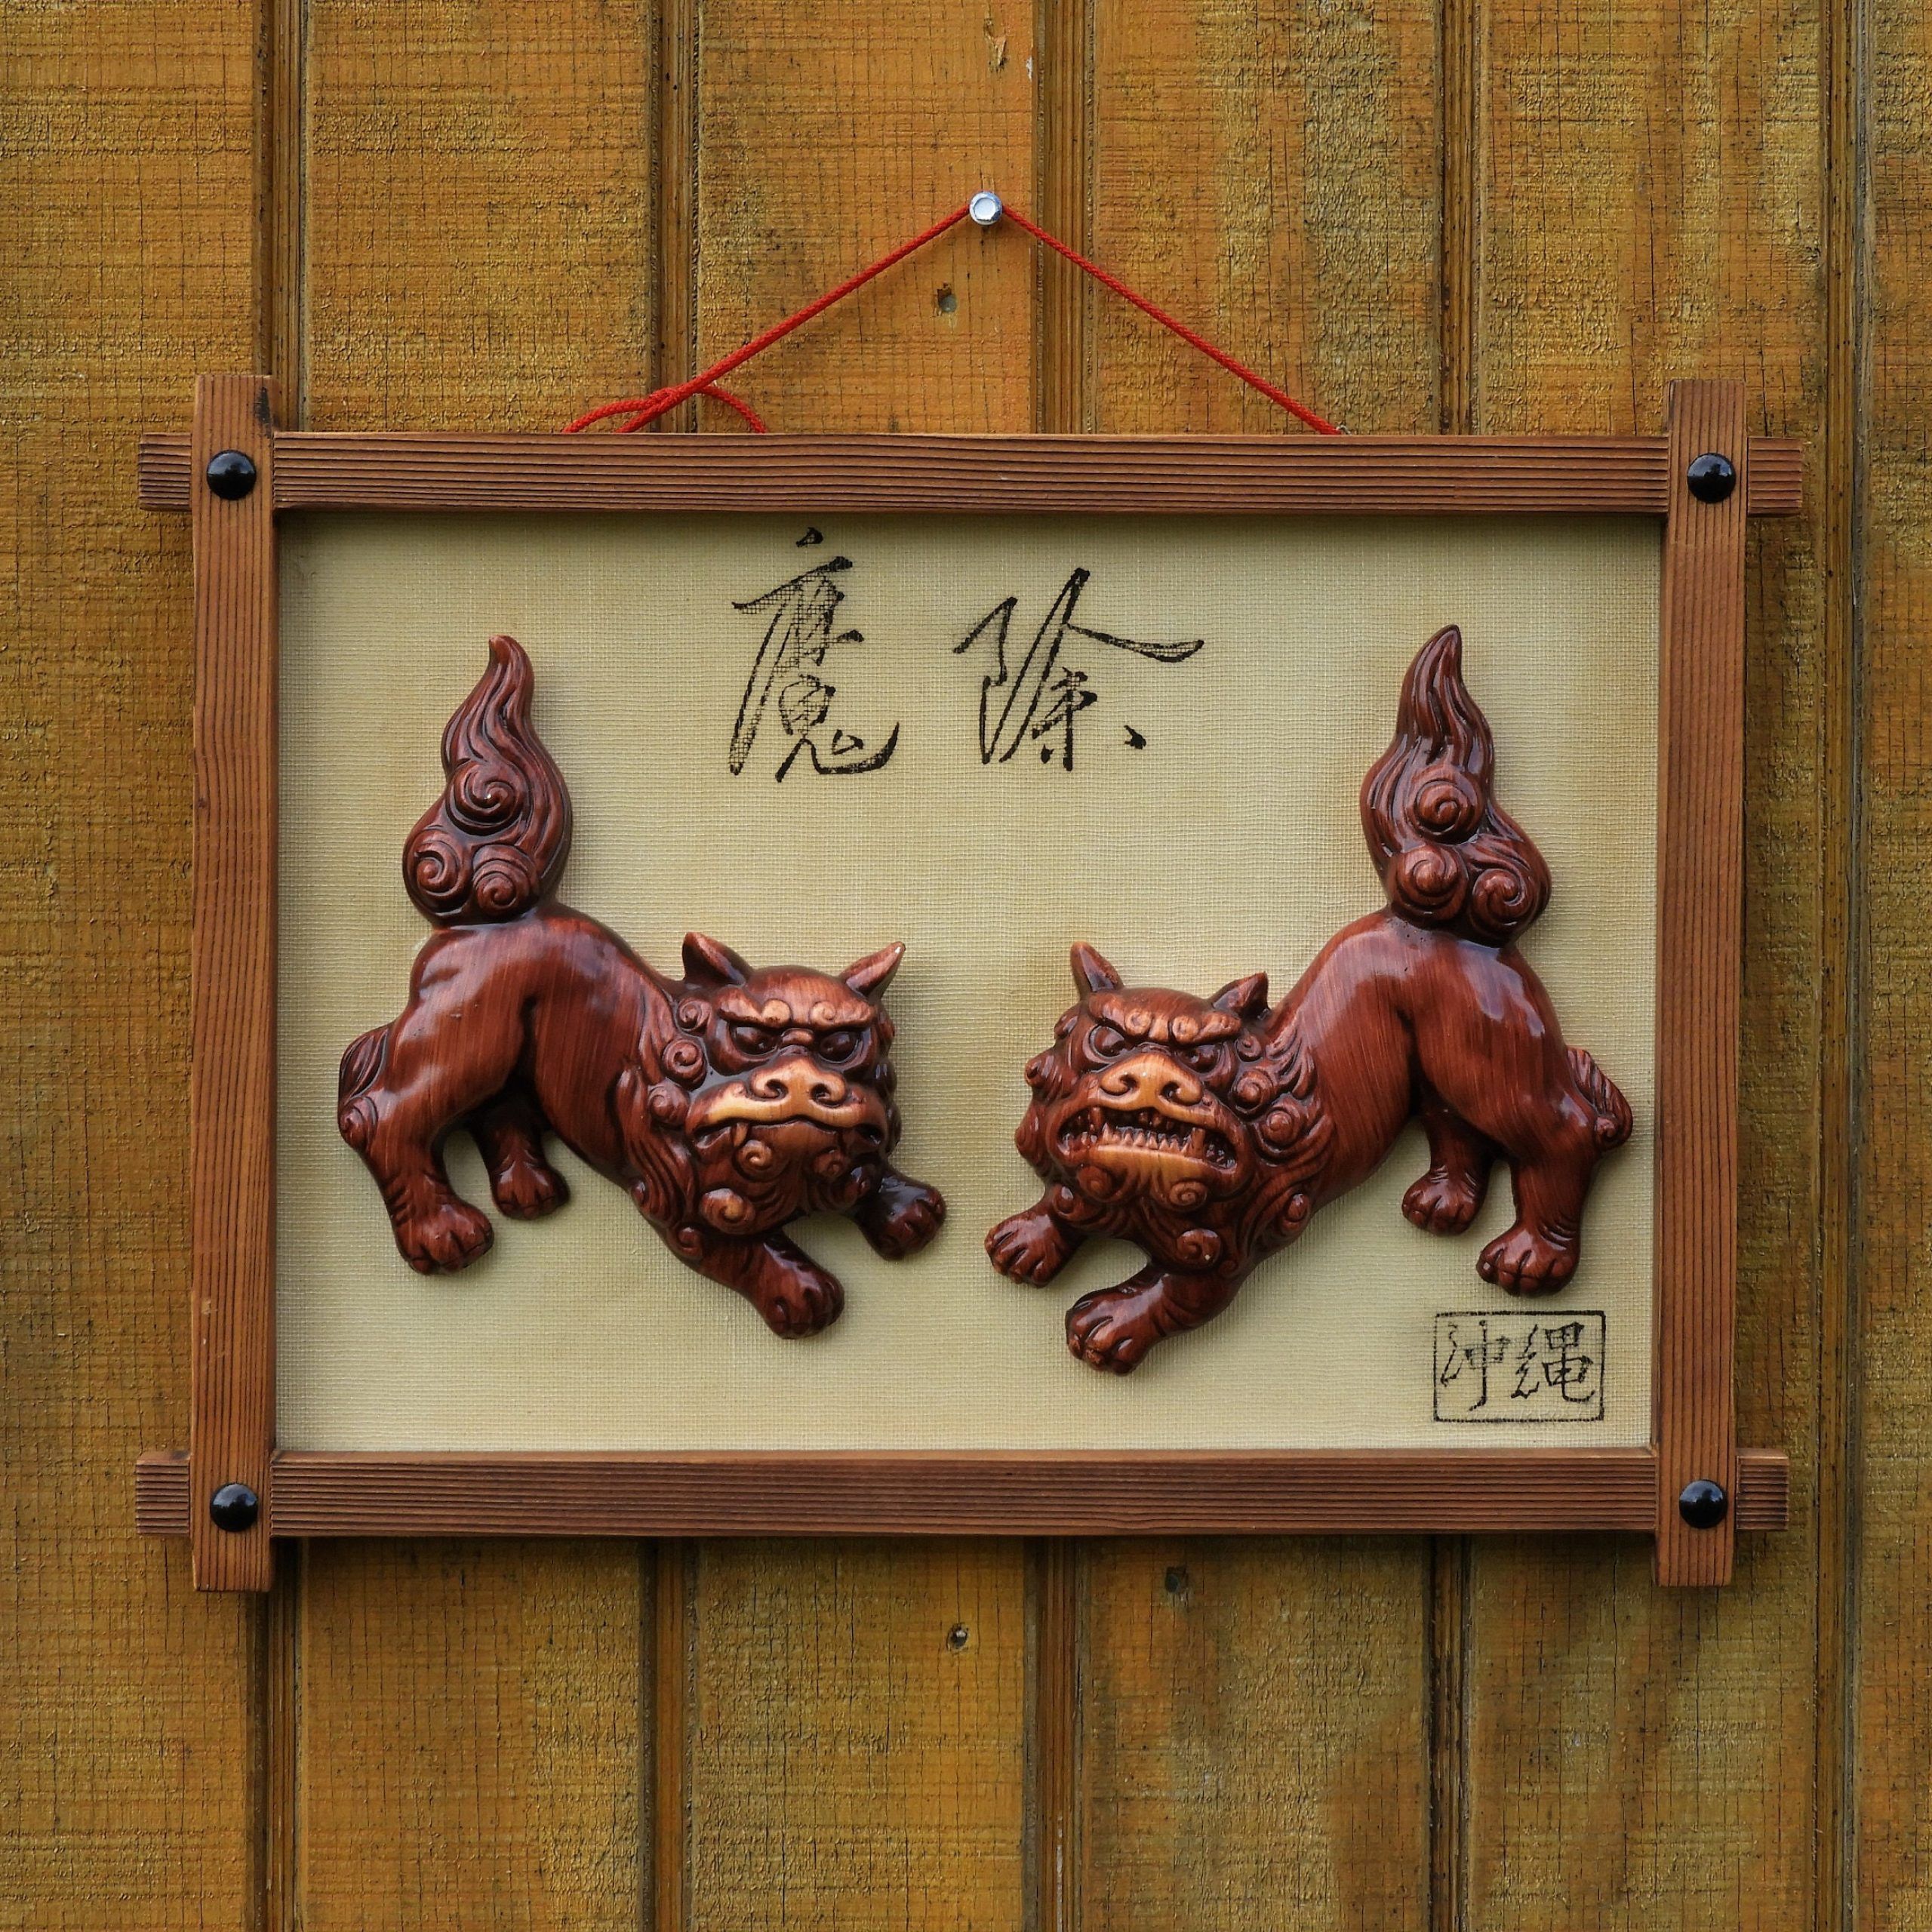 Vintage Foo Dog Decor, Wall Hanging, Chinese Dogs, Burgundy & Brown Within Most Up To Date Dog Wall Art (View 1 of 20)